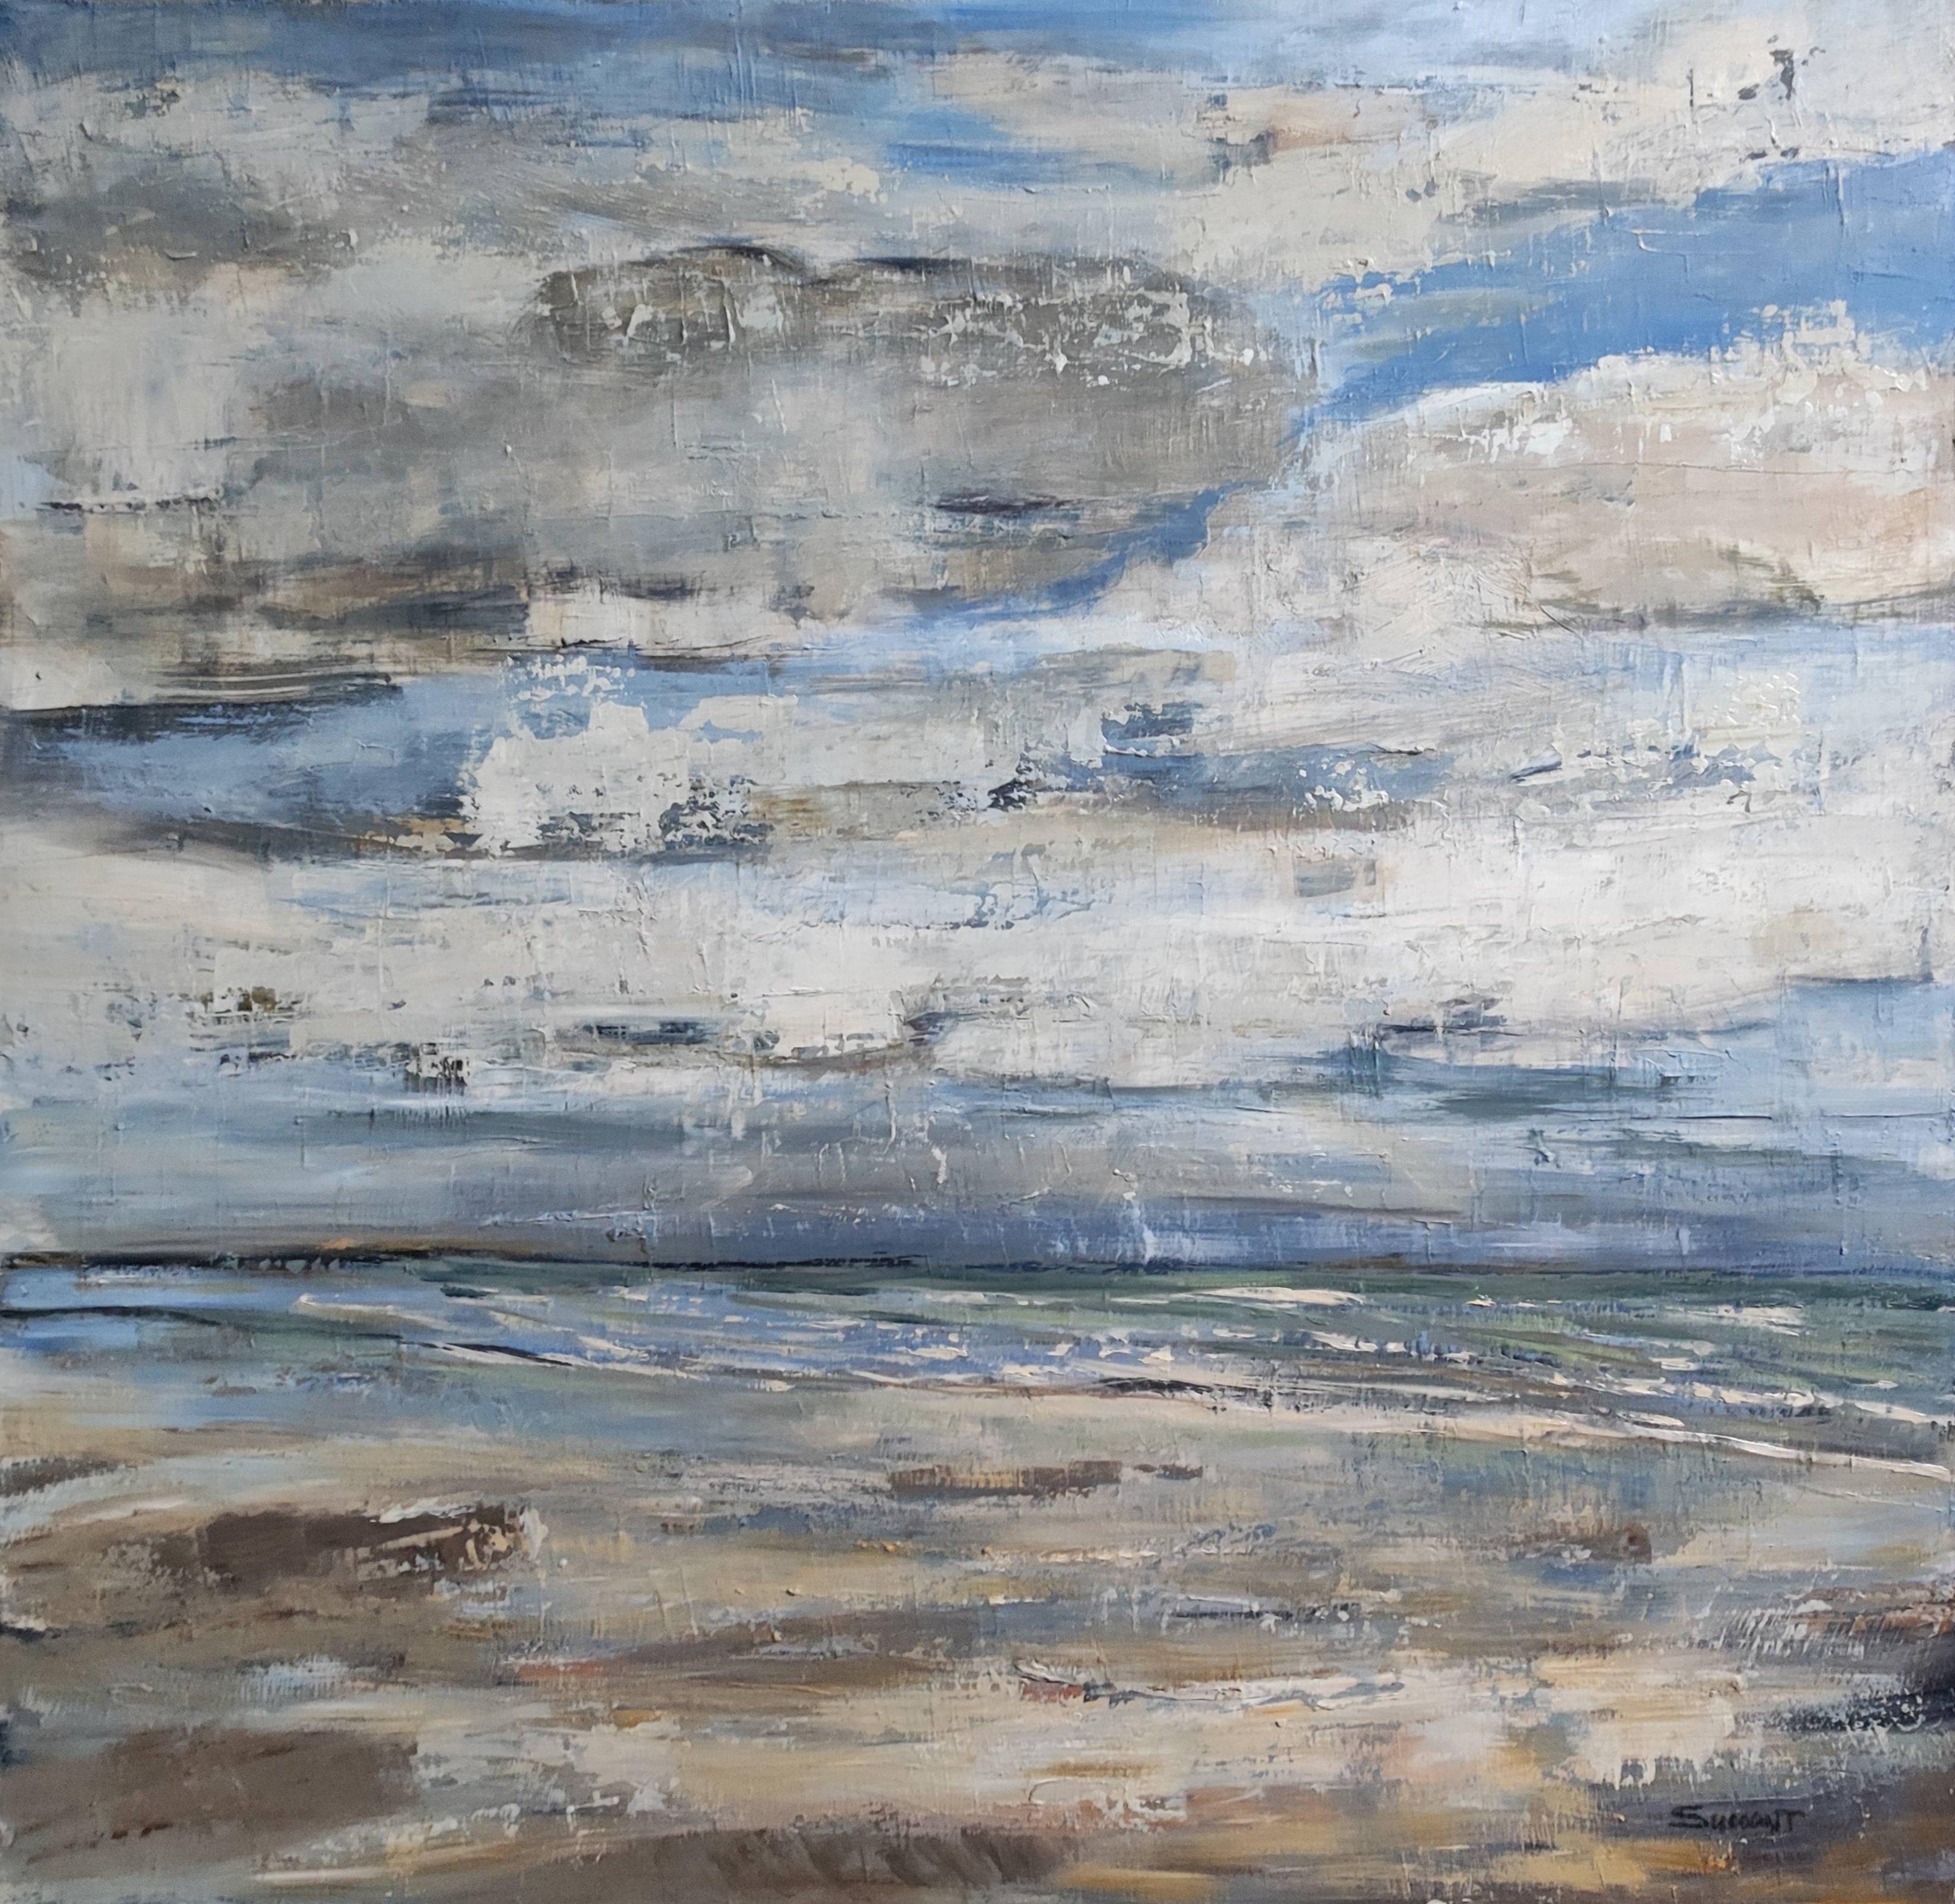 GRAY SKY, marine, seaside series, oil on canvas, semi-abstract, blue, texture - Painting by SOPHIE DUMONT